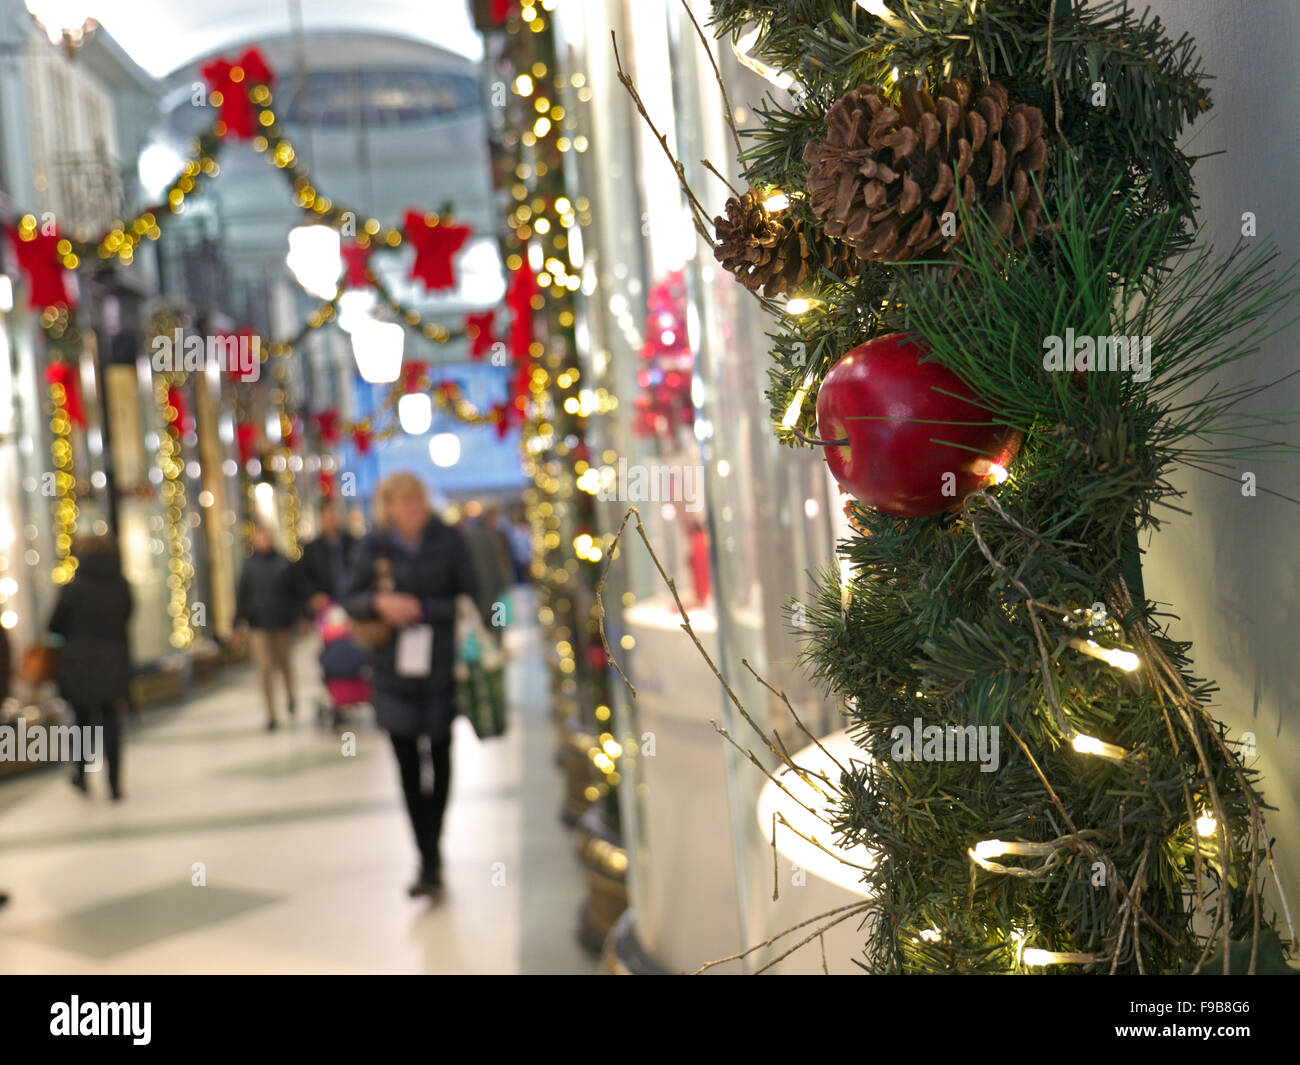 CHRISTMAS SHOPPING SHOPPERS The Piccadilly Arcade with Christmas decorations and shoppers in b/g Piccadilly  London UK Stock Photo